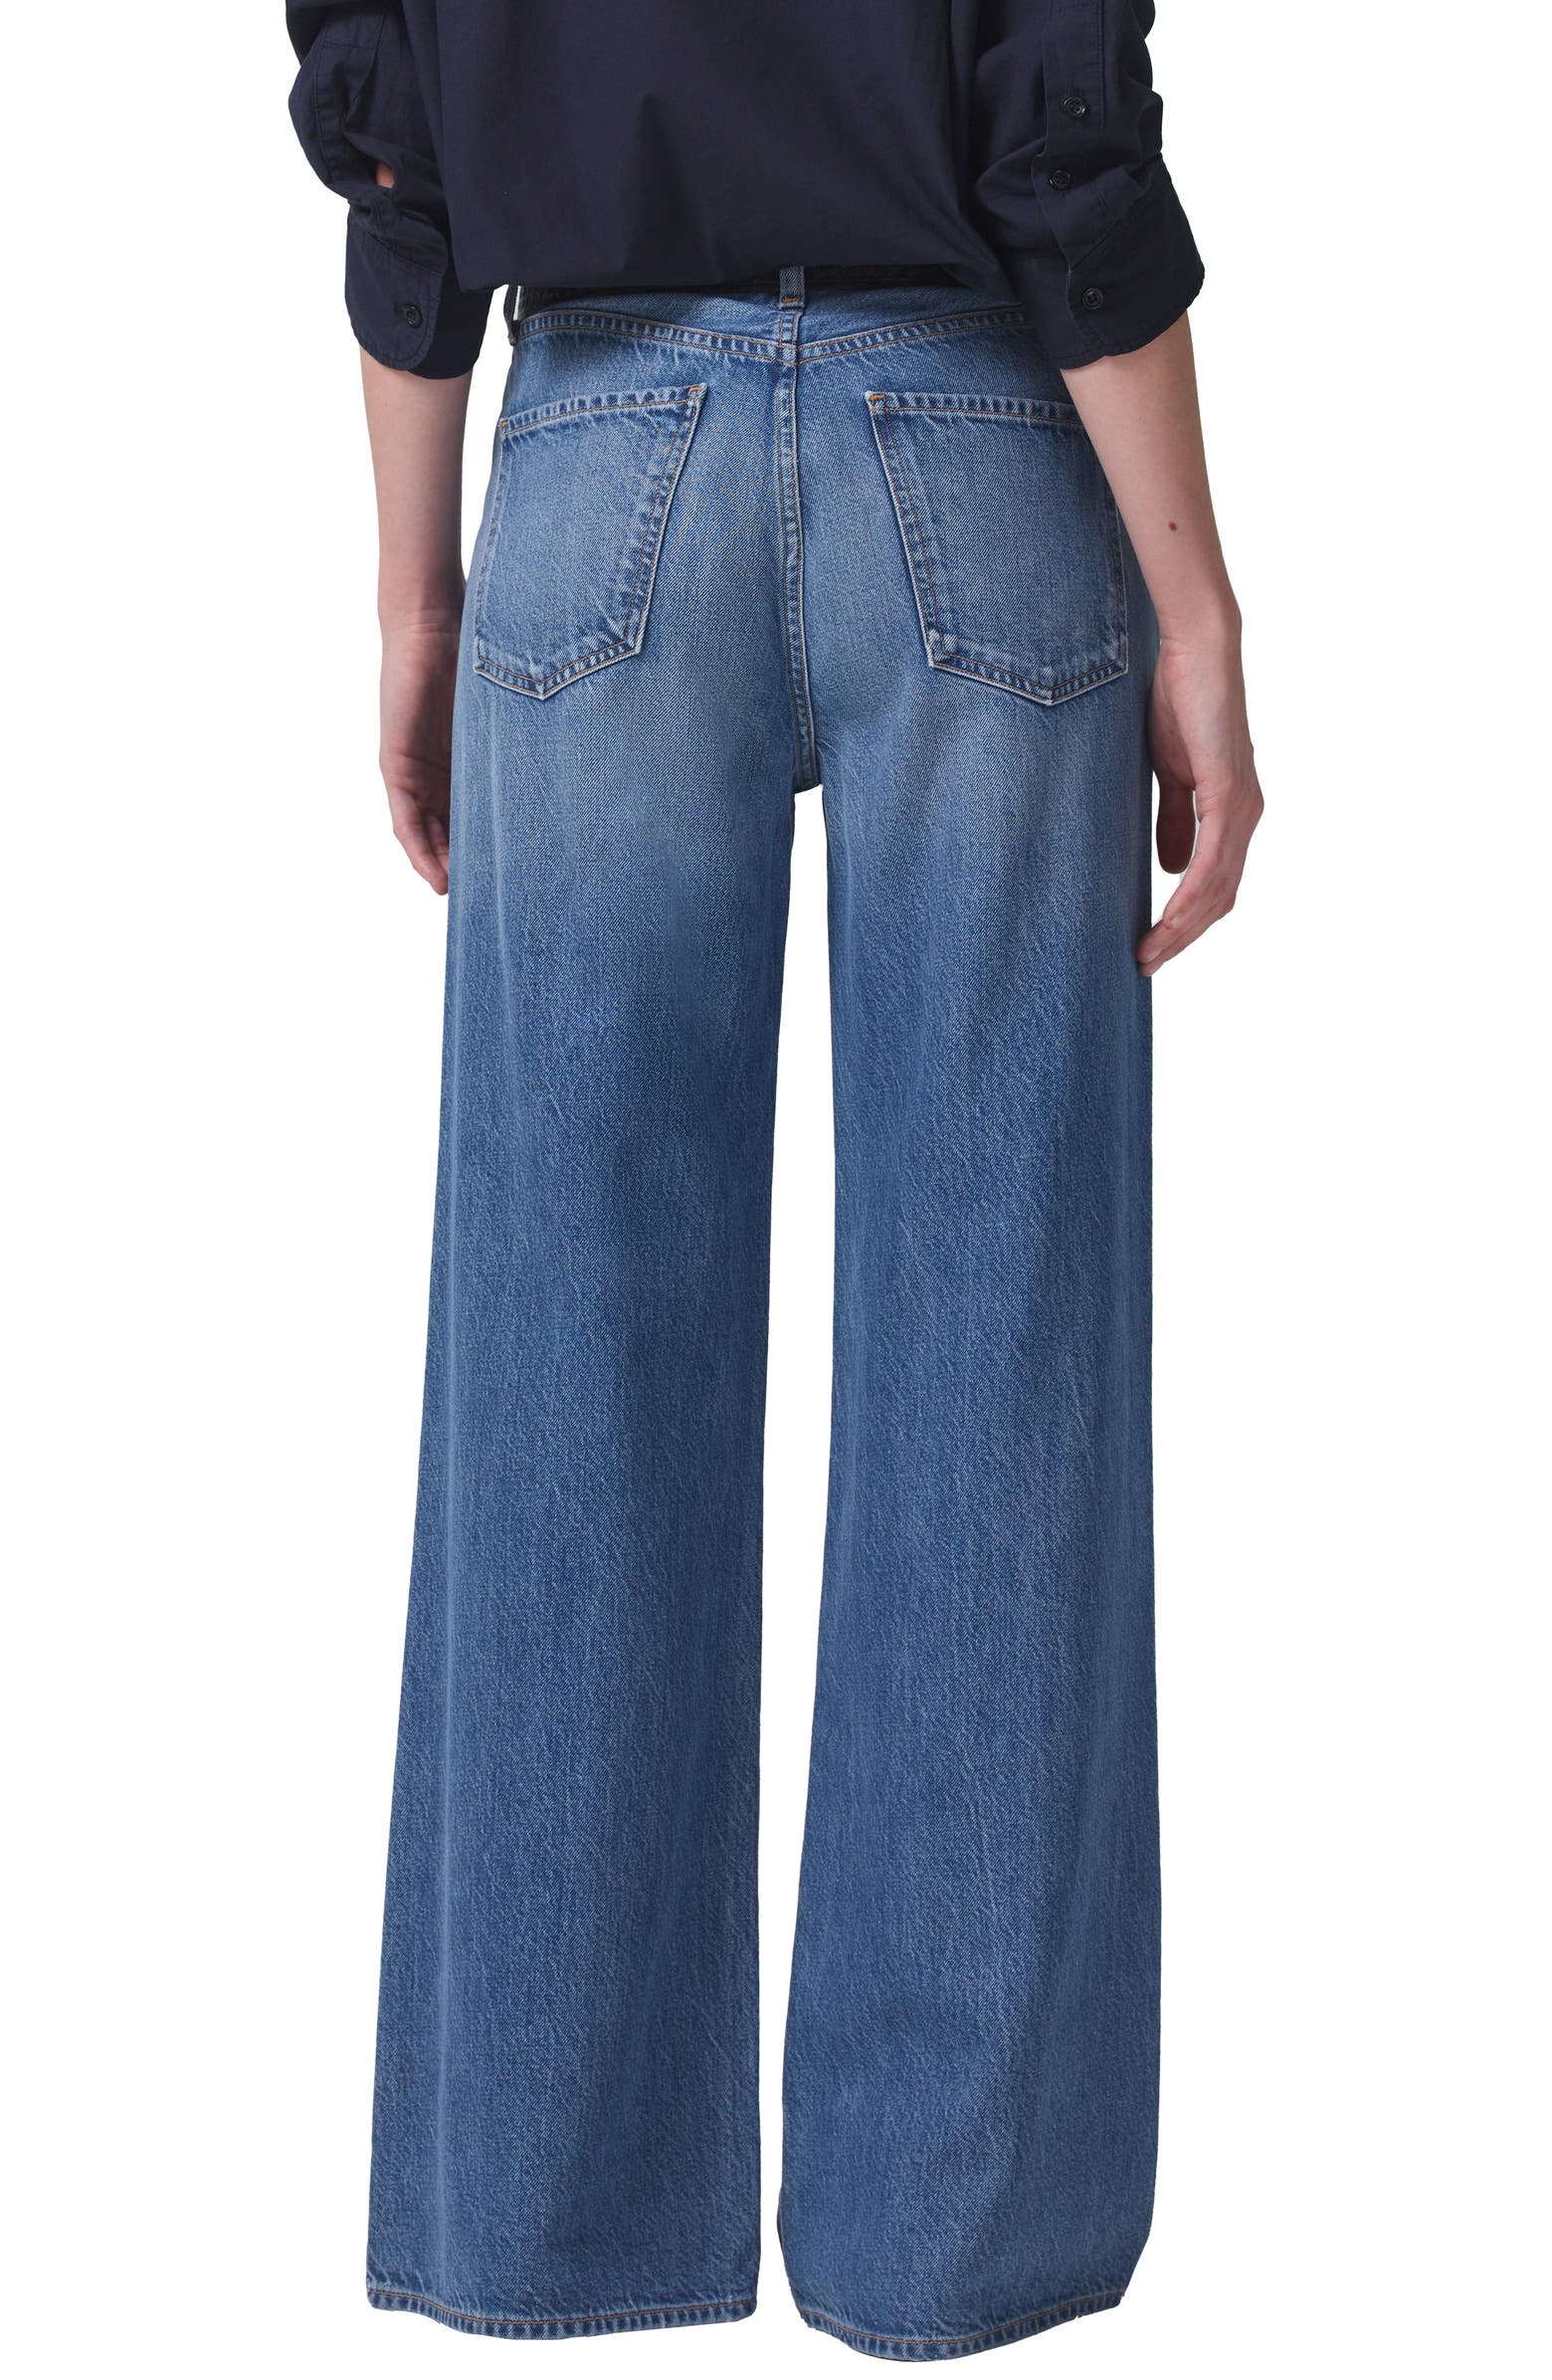 Citizens of Humanity Paloma Baggy High Waist Wide Leg Jeans | Nordstrom